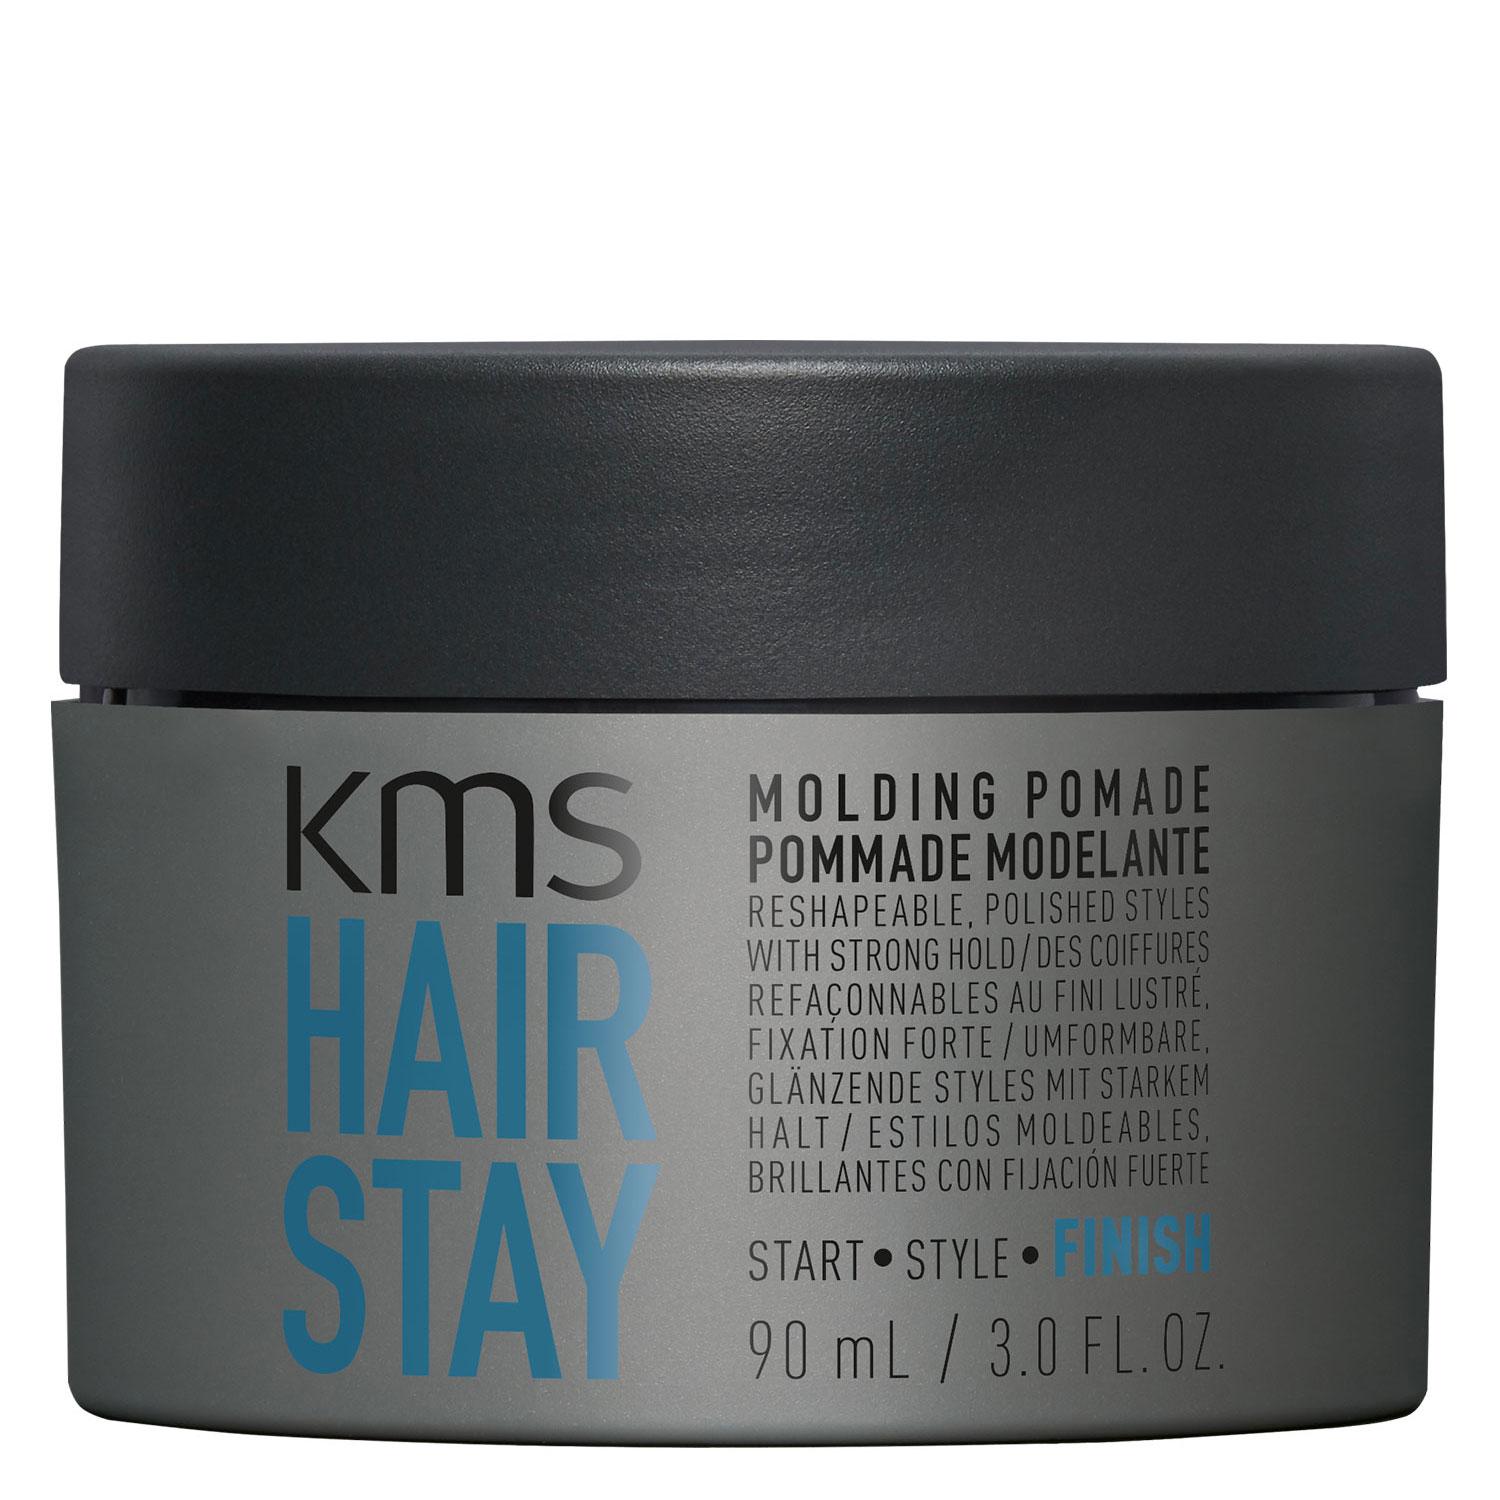 Hairstay - Molding Pomade